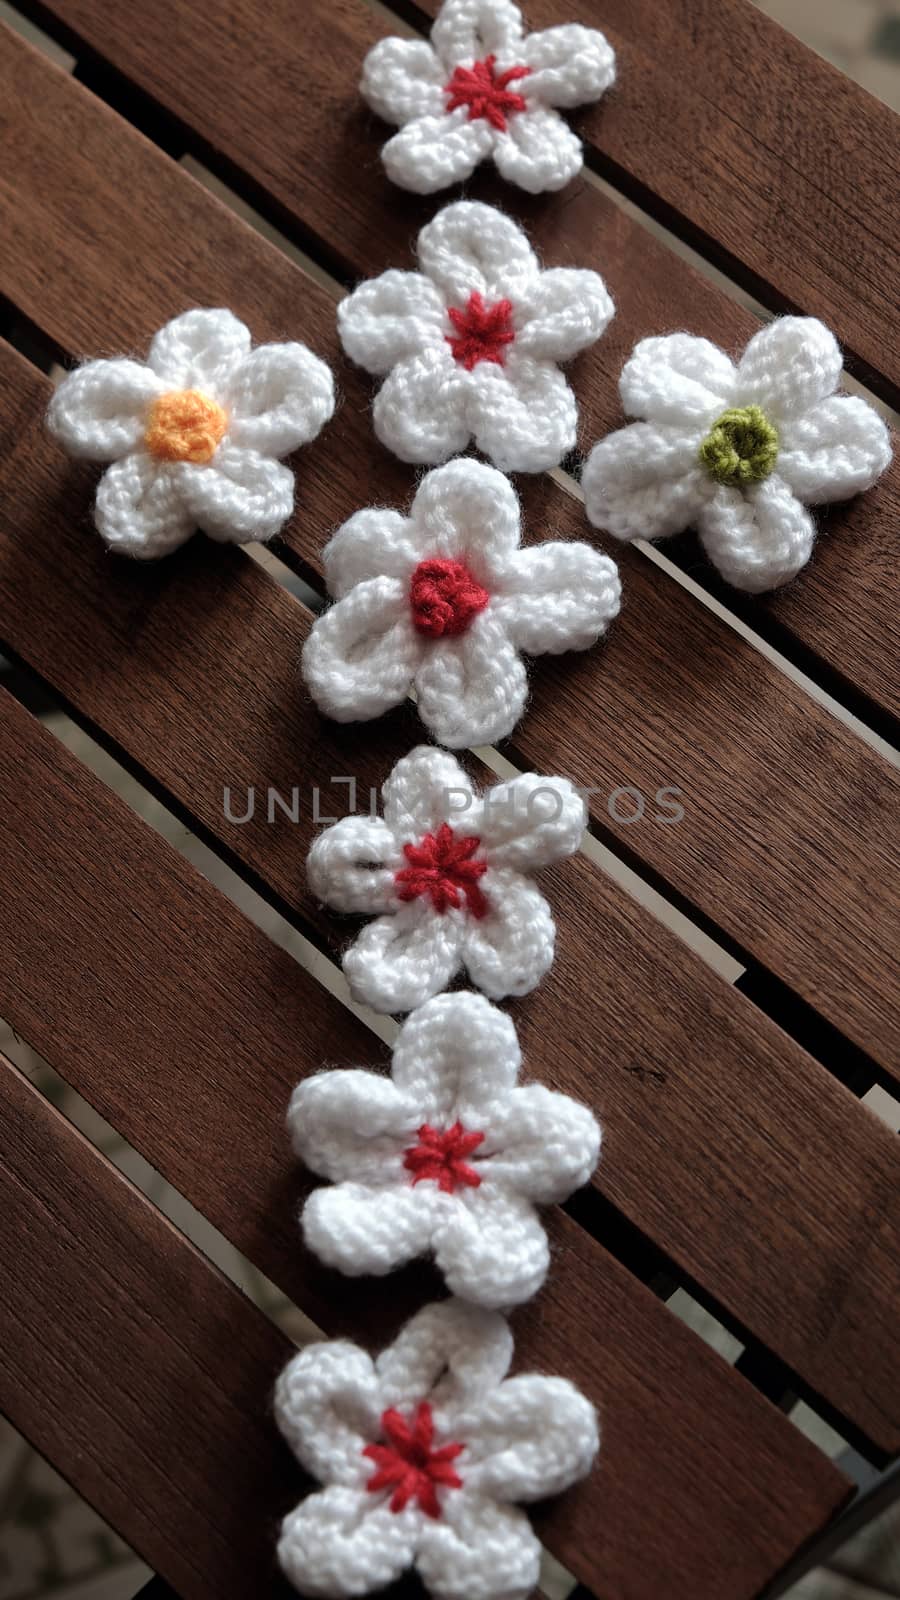 Group of handmade product for mother day, white daisy flower on wood background, make by knit from yarn